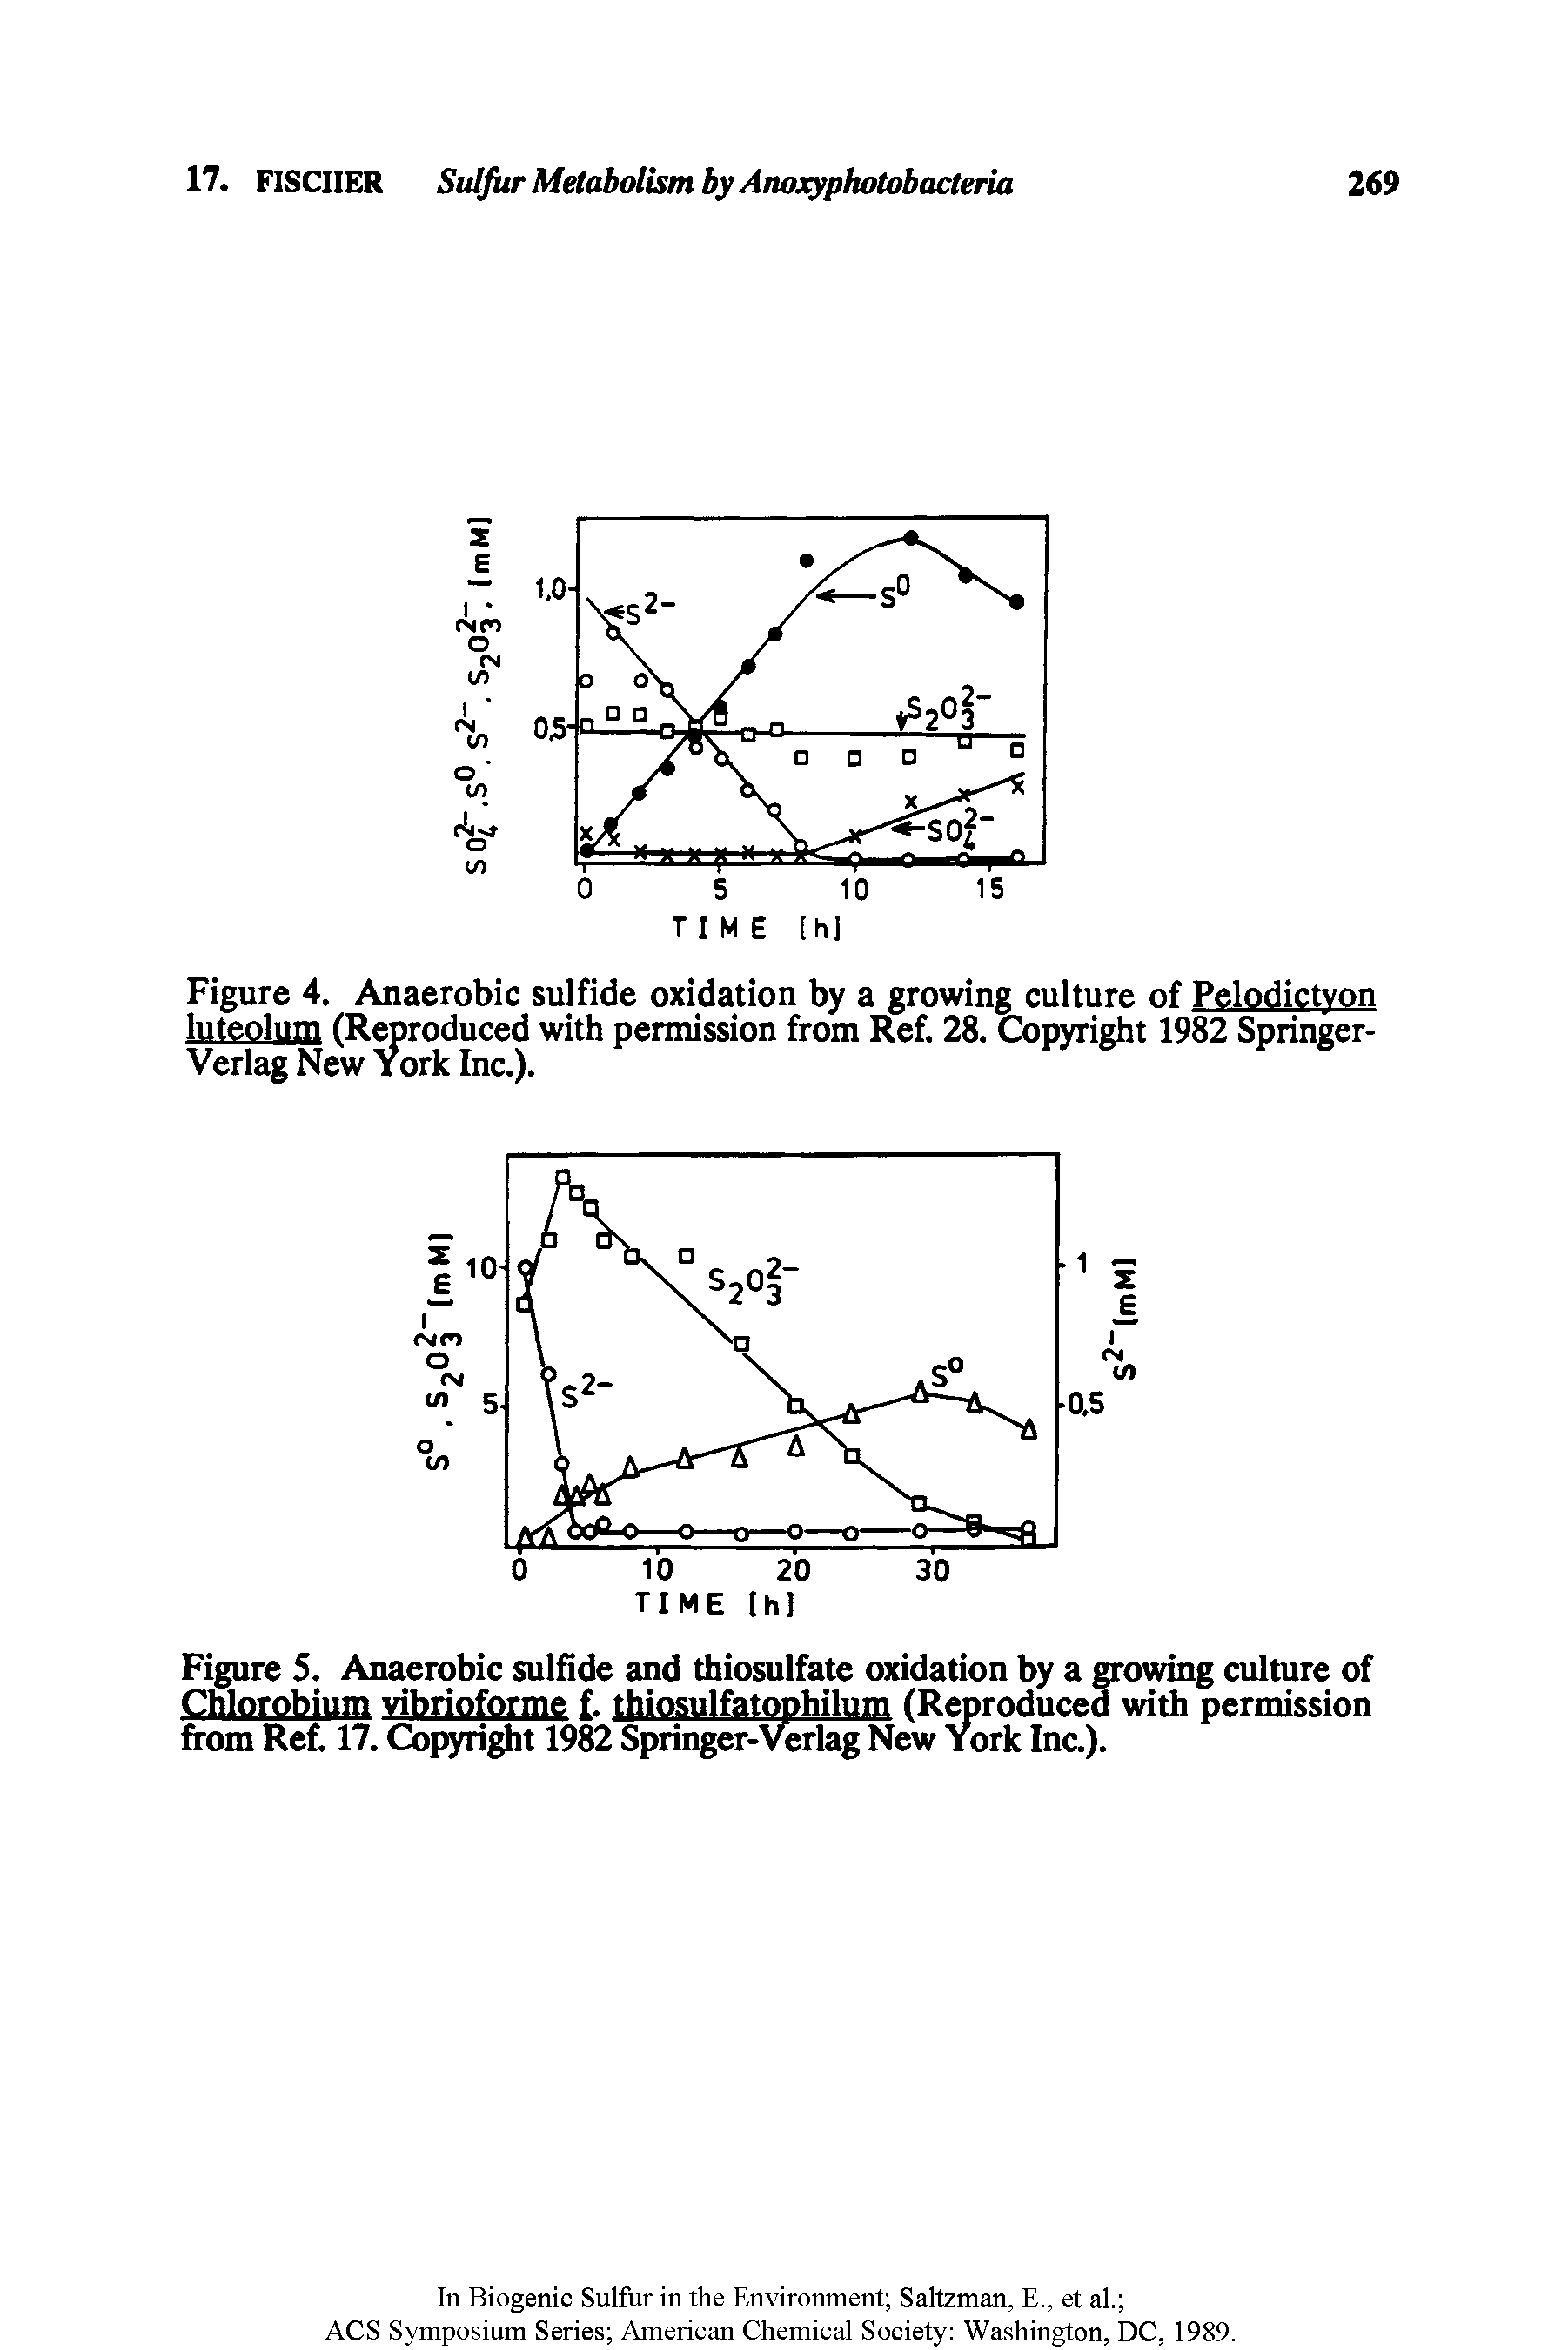 Figure 5. Anaerobic sulfide and thiosulfate oxidation by a growing culture of Chlorobium vibrioforme f. thiosulfatophilum (Reproduced with permission from Ref. 17. Copyright 1982 Springer-Verlag New York Inc.).